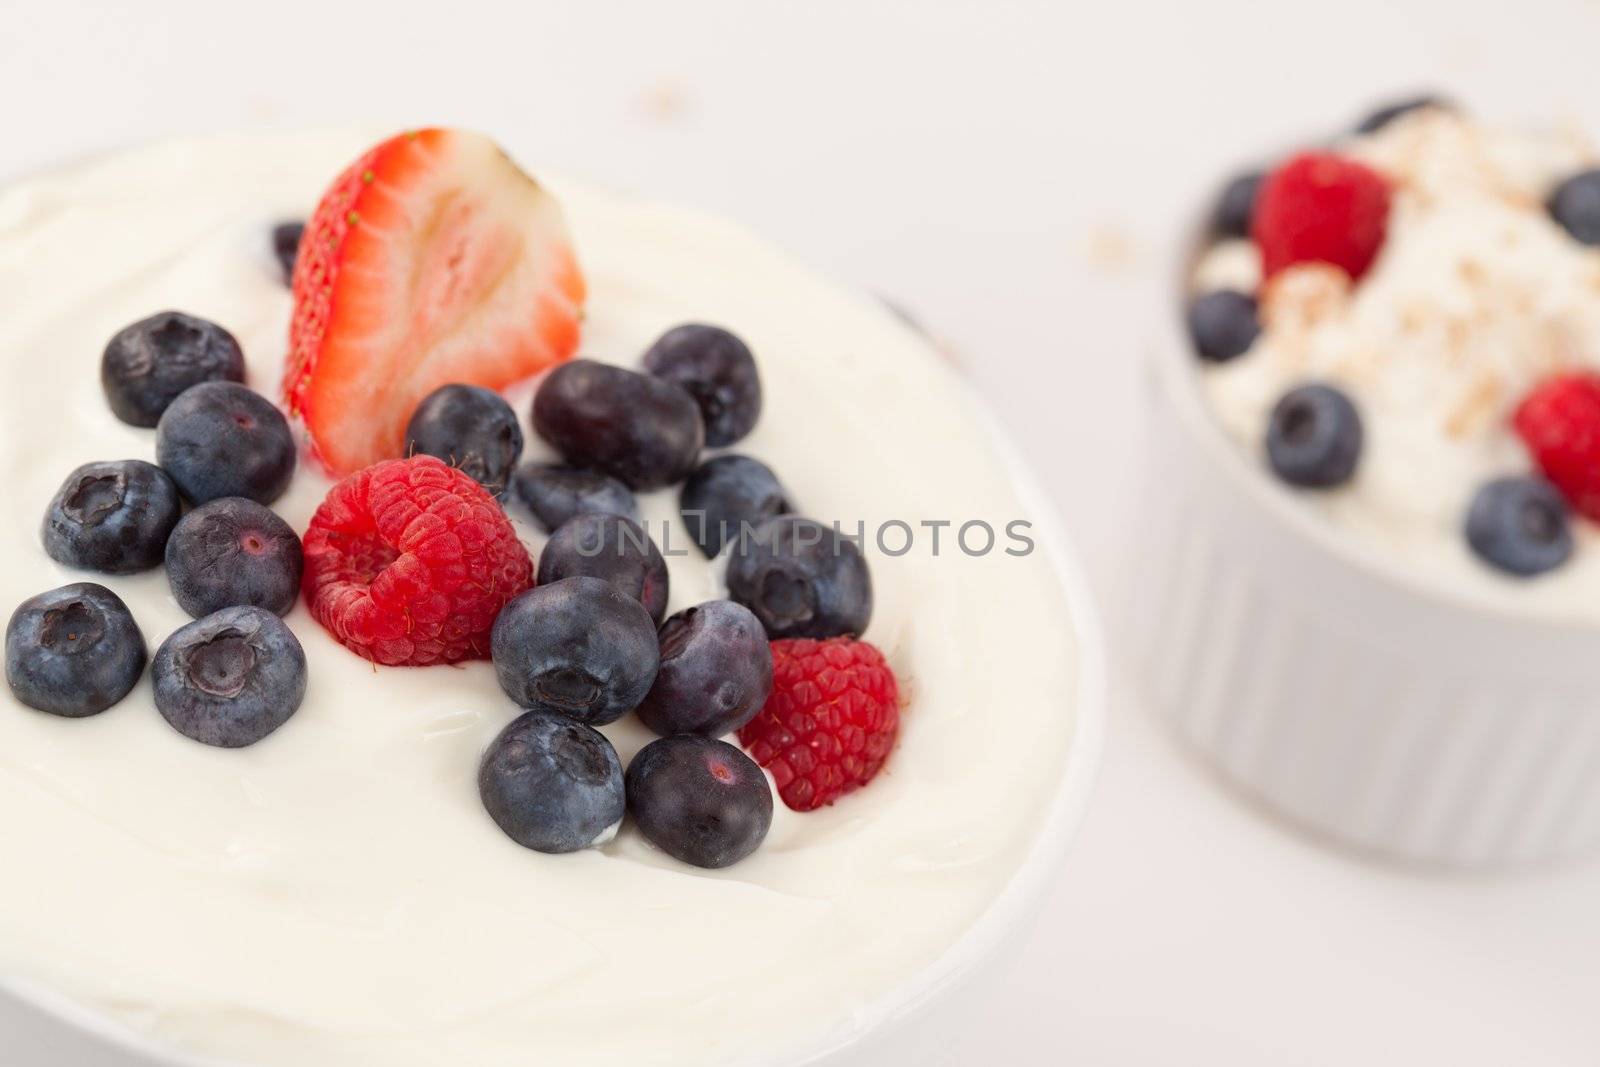 Bowl of cream with different berries against a white background